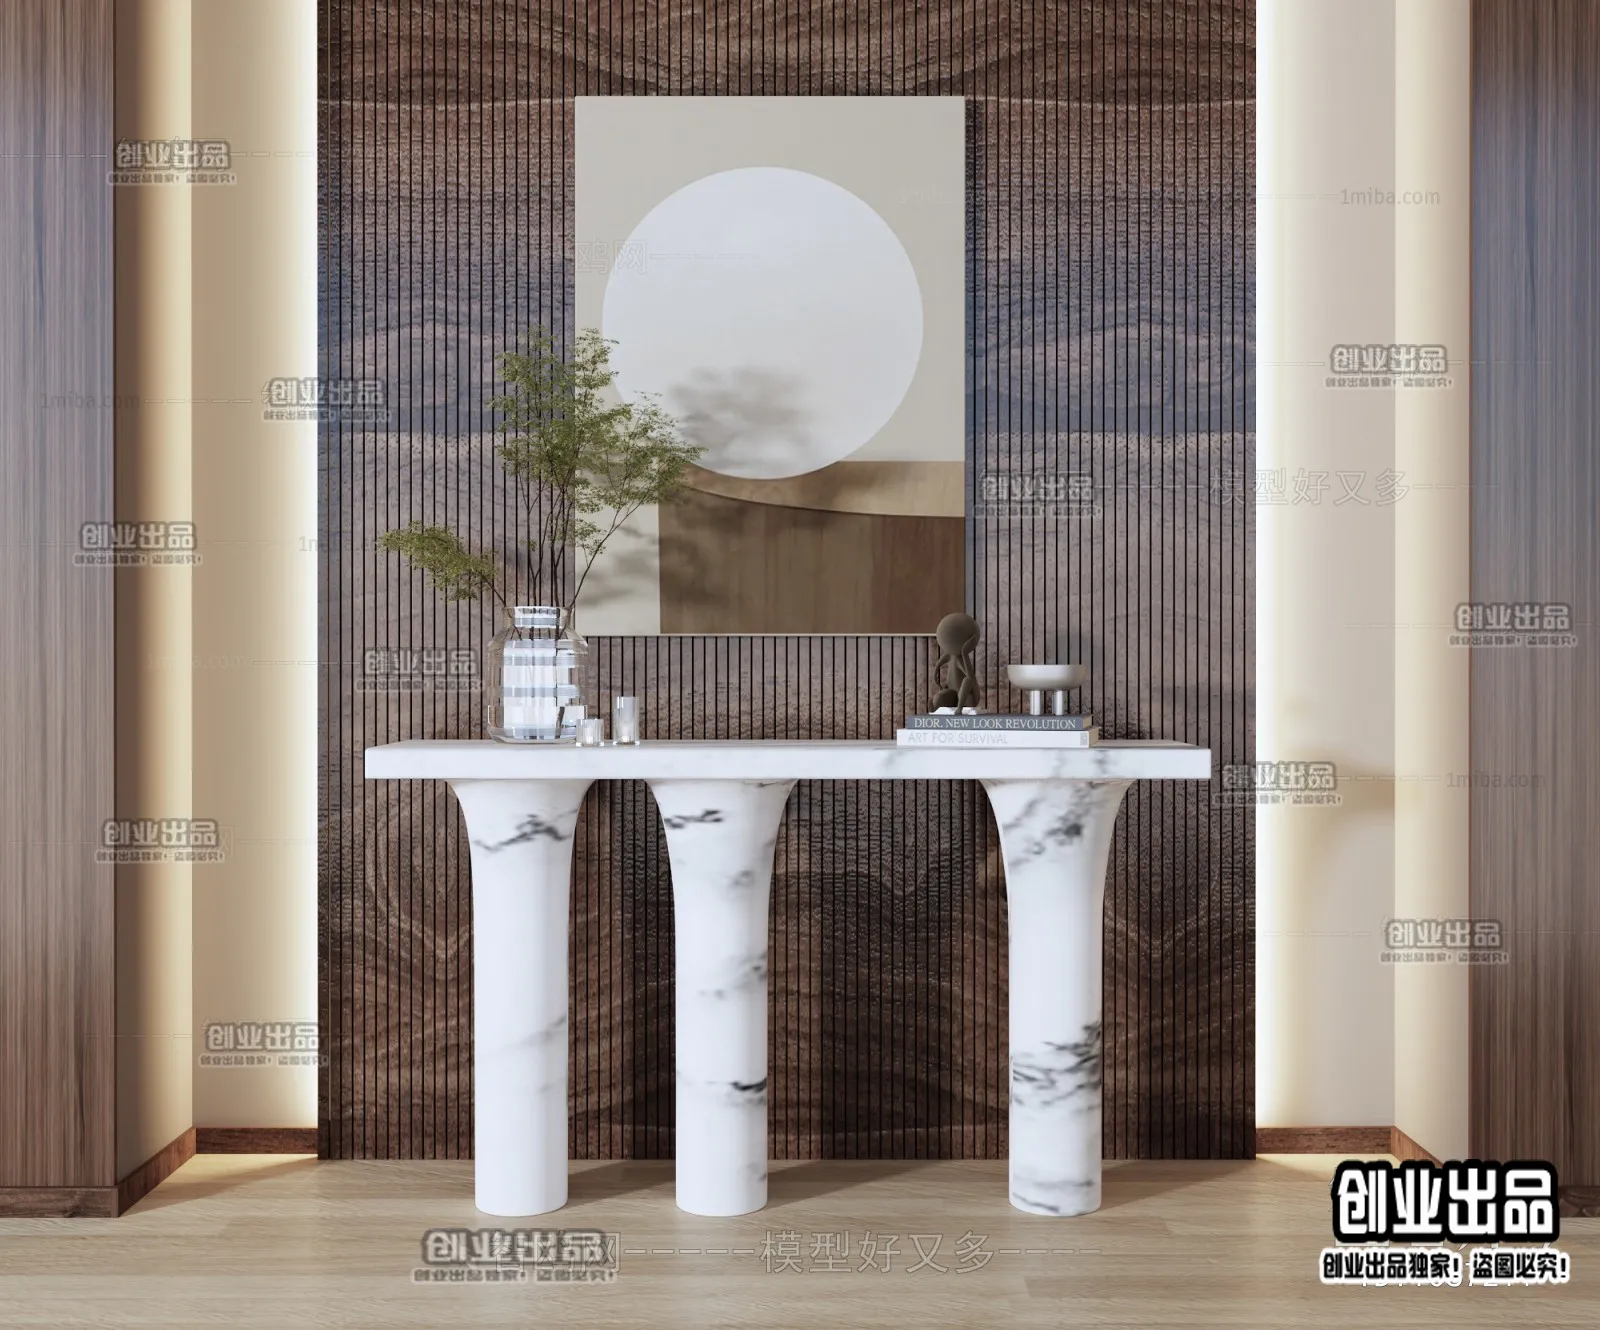 CONSOLE TABLE – 21 – FURNITURE 3D MODELS 2022 (VRAY)